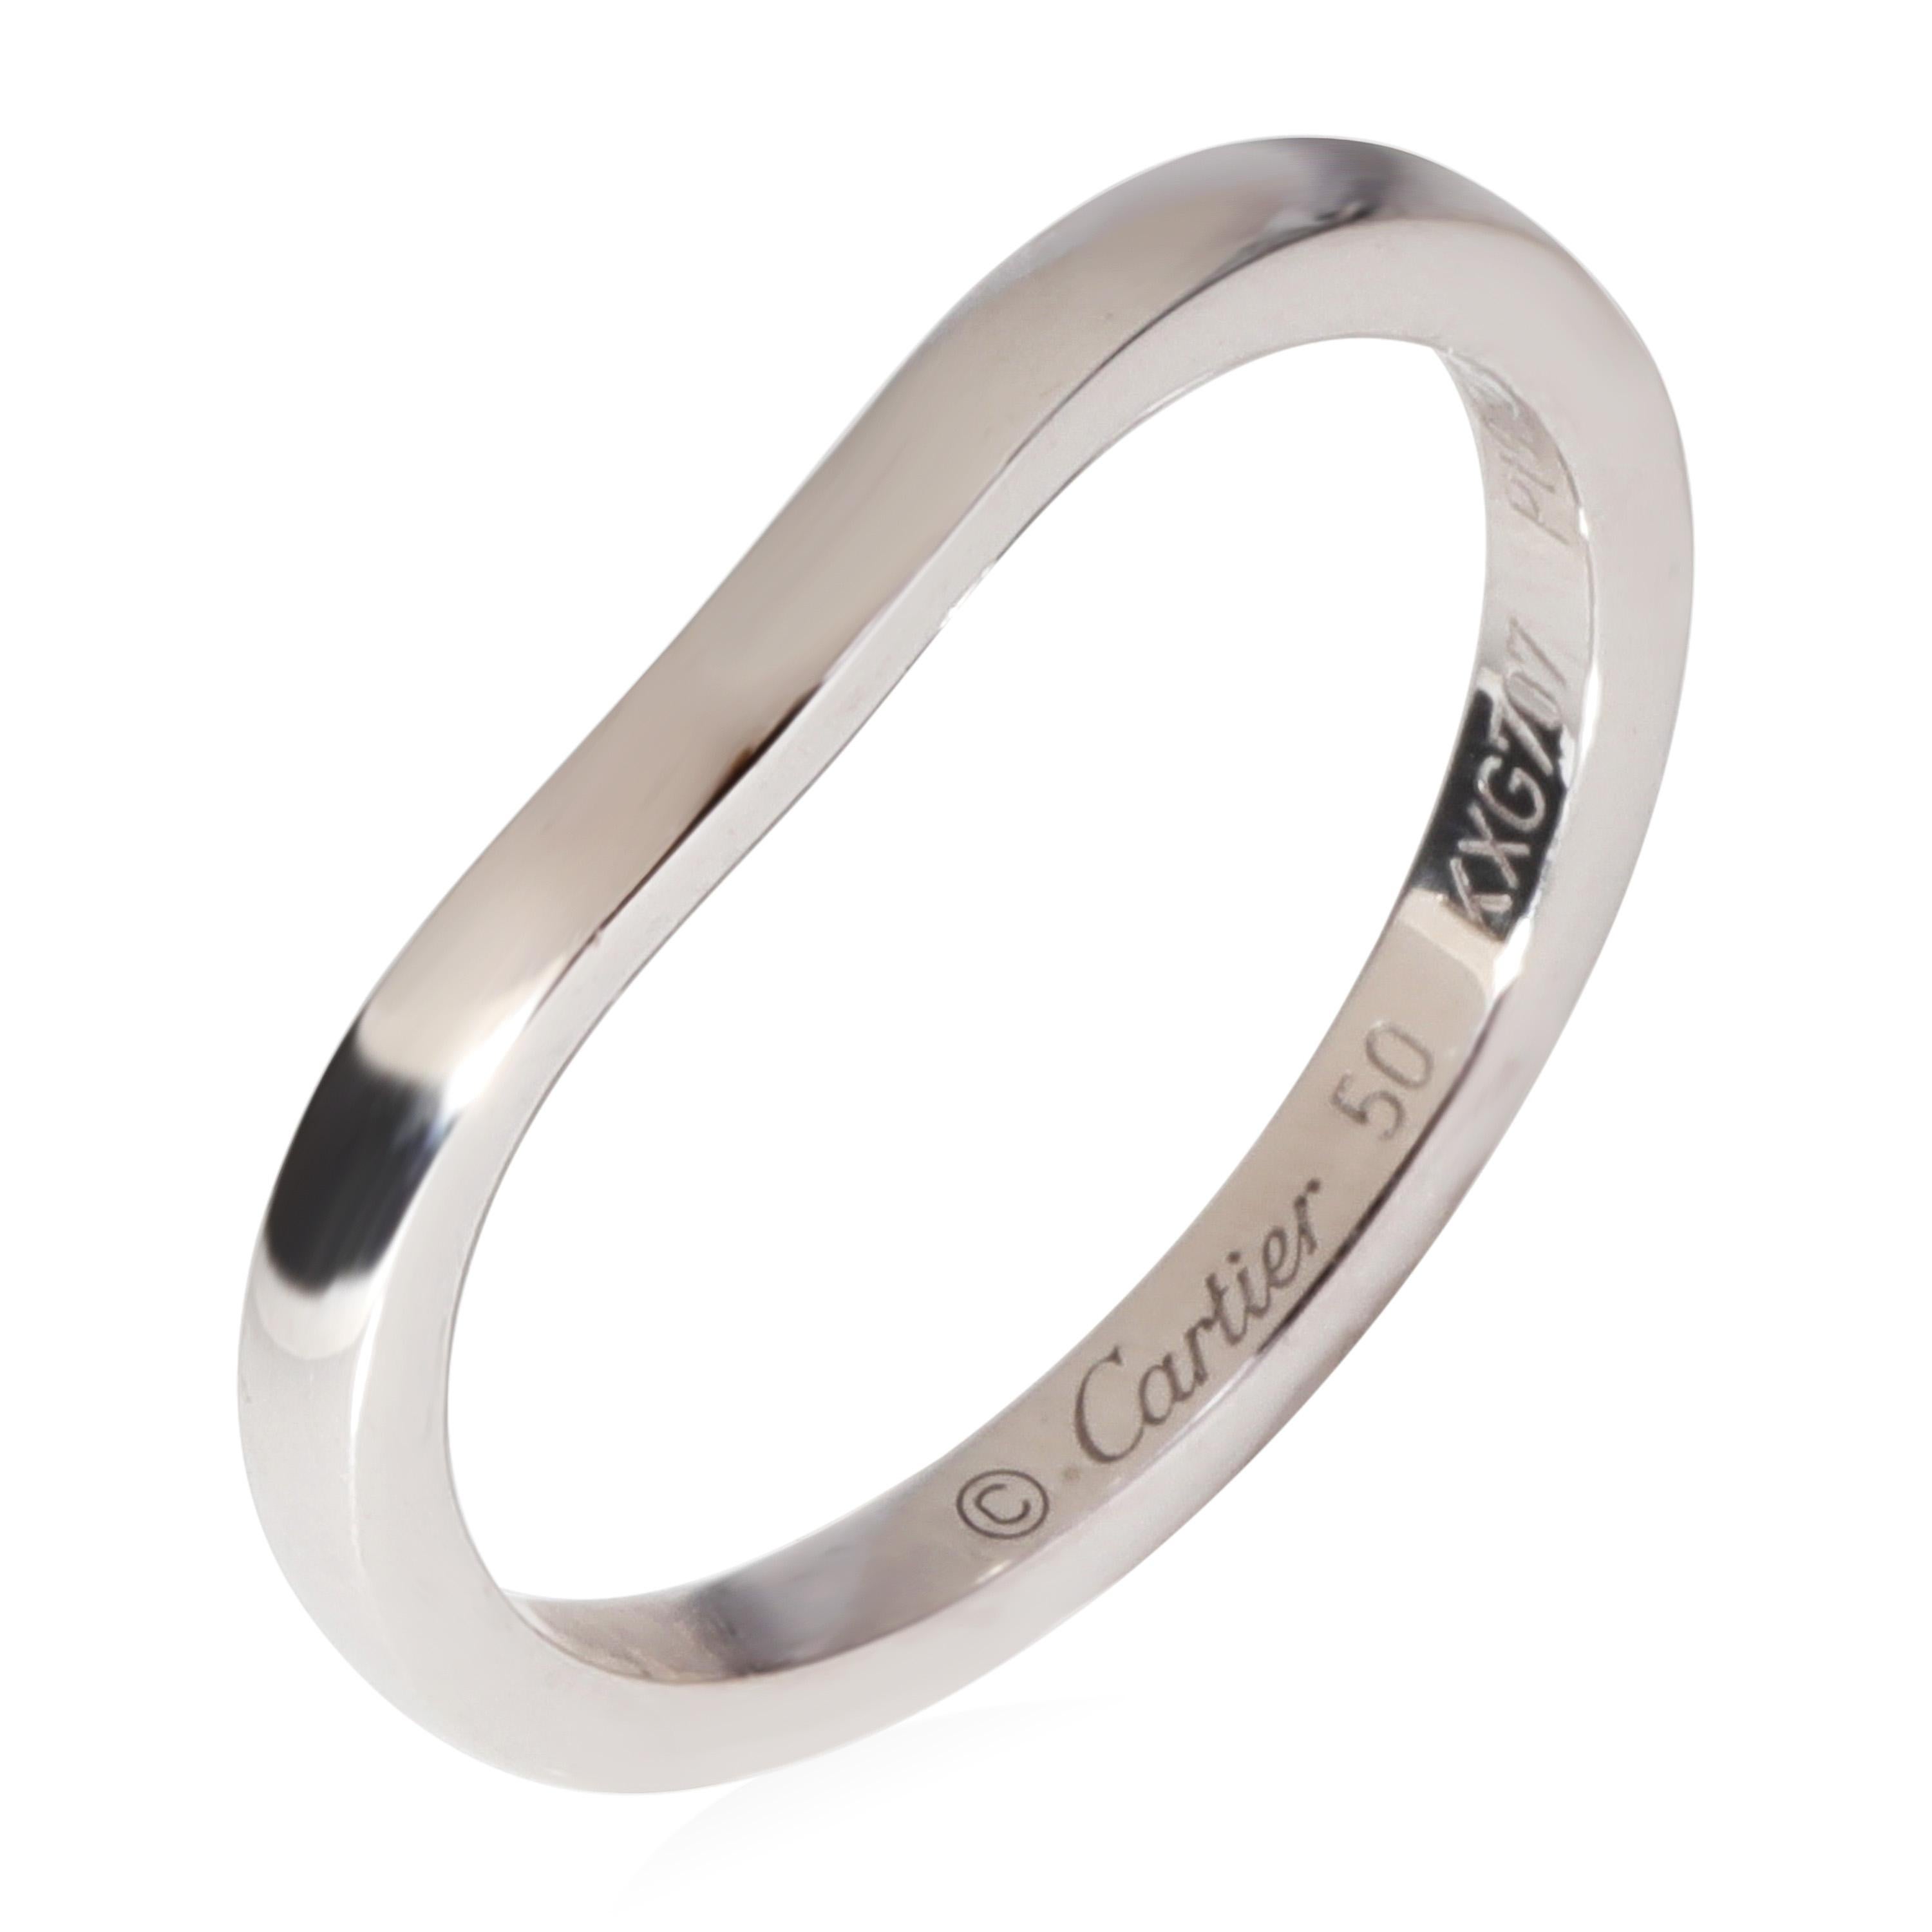 Cartier Ballerine Curved Wedding Band in Platinum

PRIMARY DETAILS
SKU: 119839
Listing Title: Cartier Ballerine Curved Wedding Band in Platinum
Condition Description: Retails for 1600 USD. In excellent condition and recently polished. Ring size is